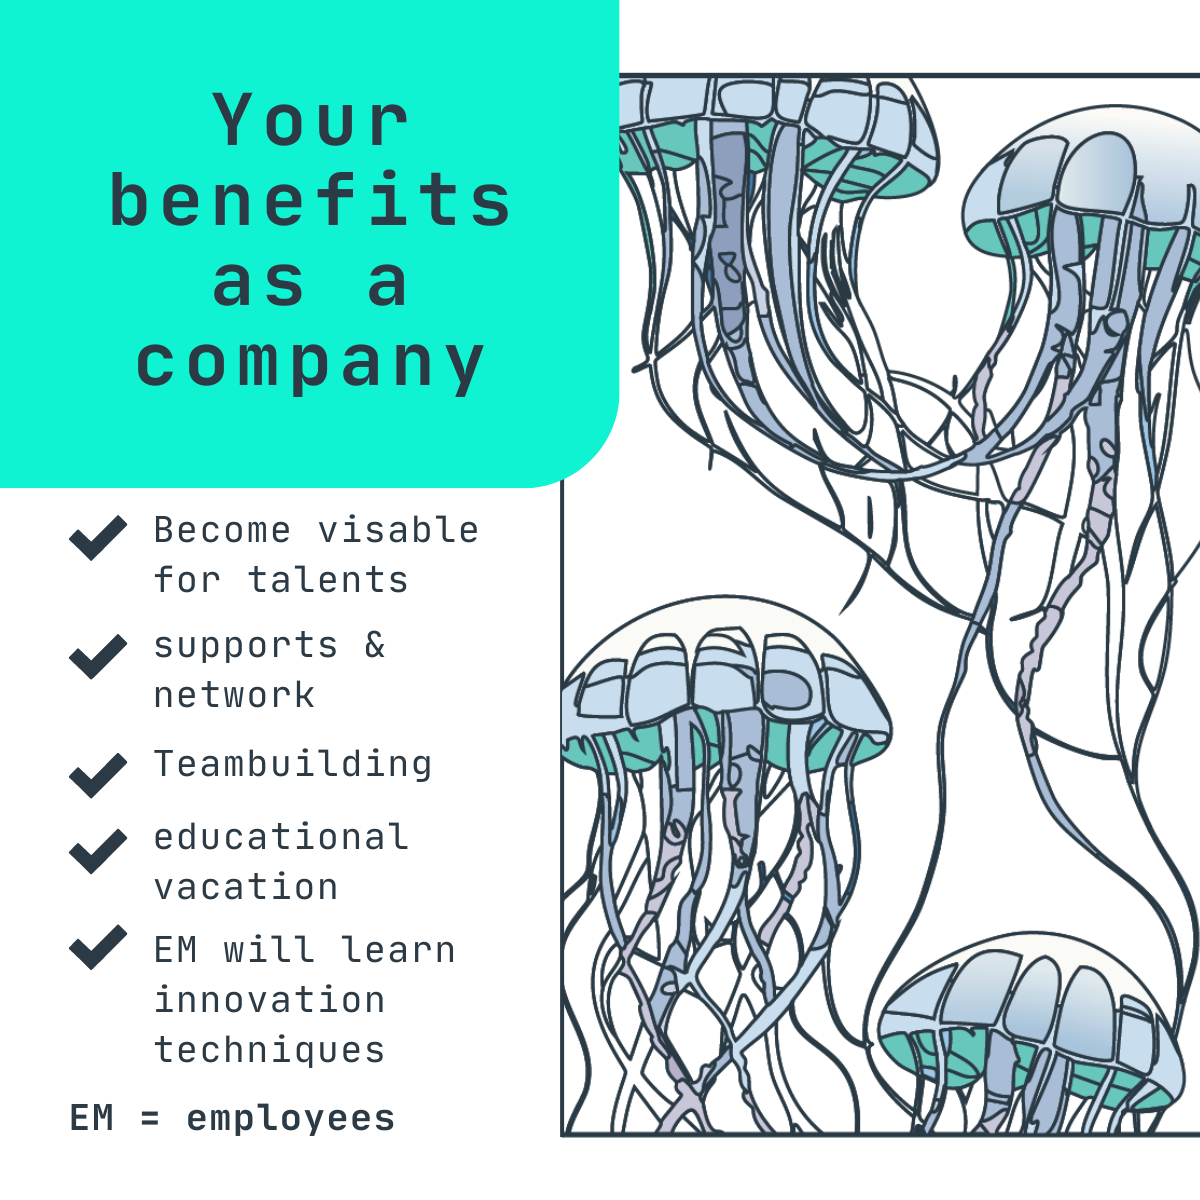 Benefits for companies